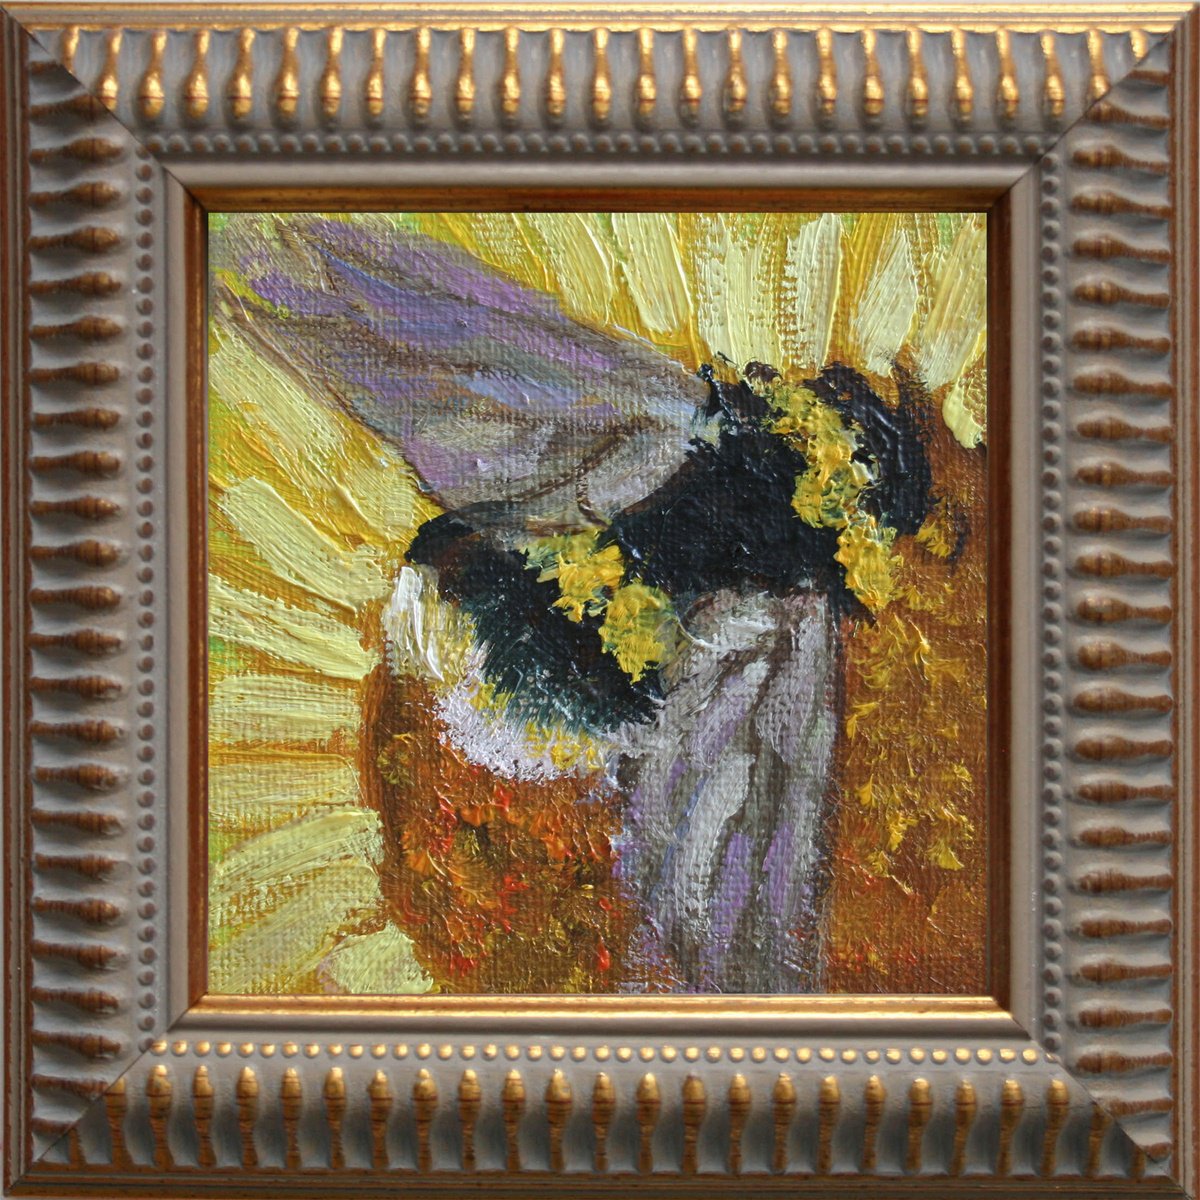 BUMBLEBEE 11 framed / FROM MY SERIES MINI PICTURE / ORIGINAL PAINTING by Salana Art Gallery